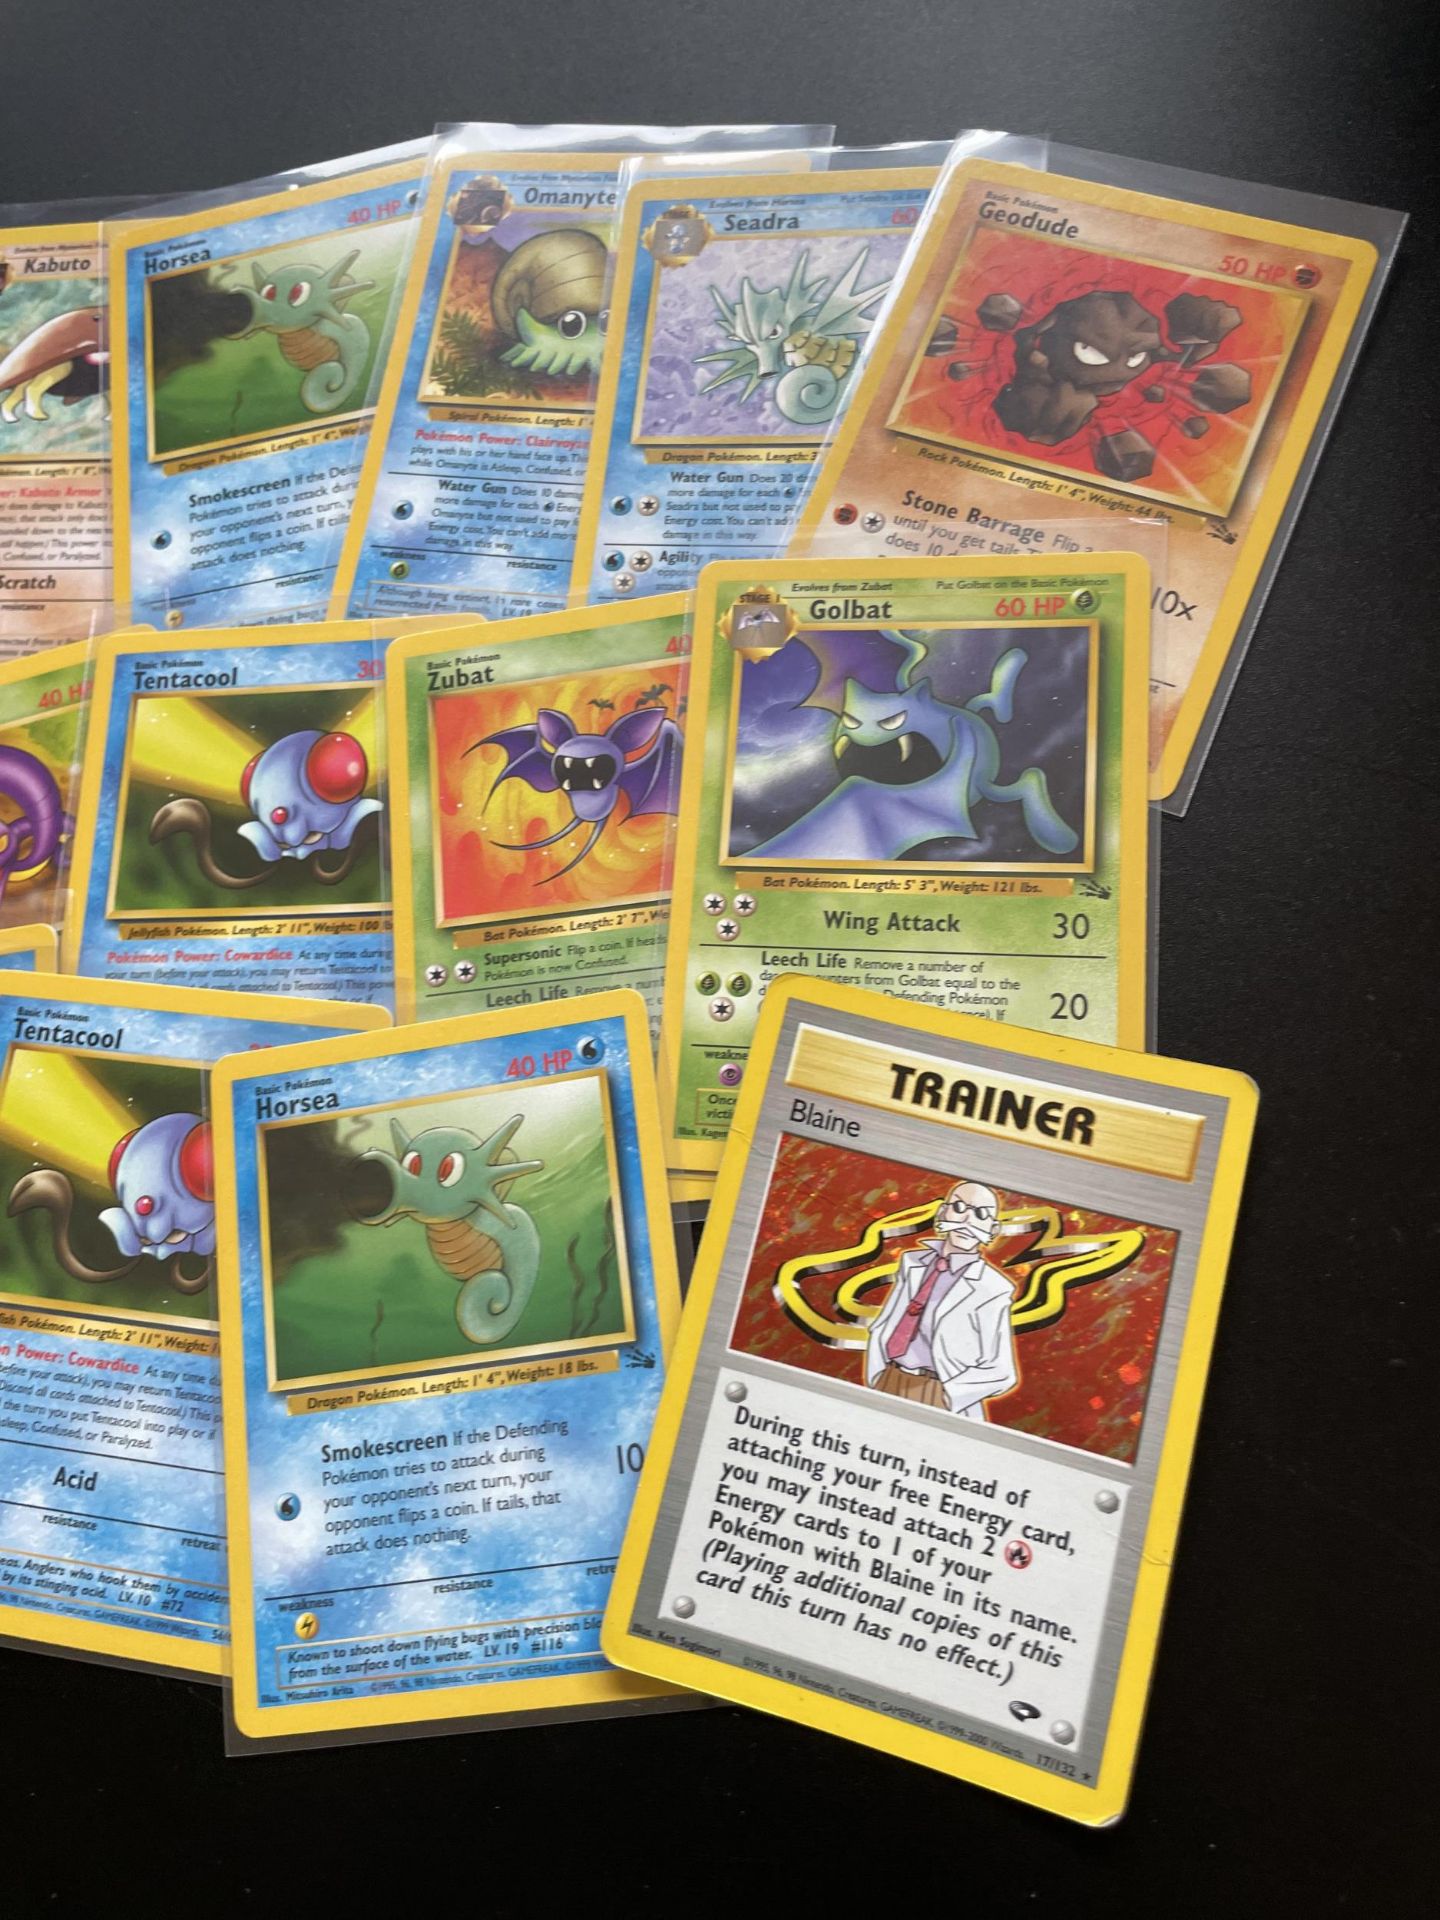 A COLLECTION OF 1999 WOTC POKEMON CARDS, FOSSIL SET, HOLO BLAINE GYM HEROES TRAINER ETC - Image 4 of 5